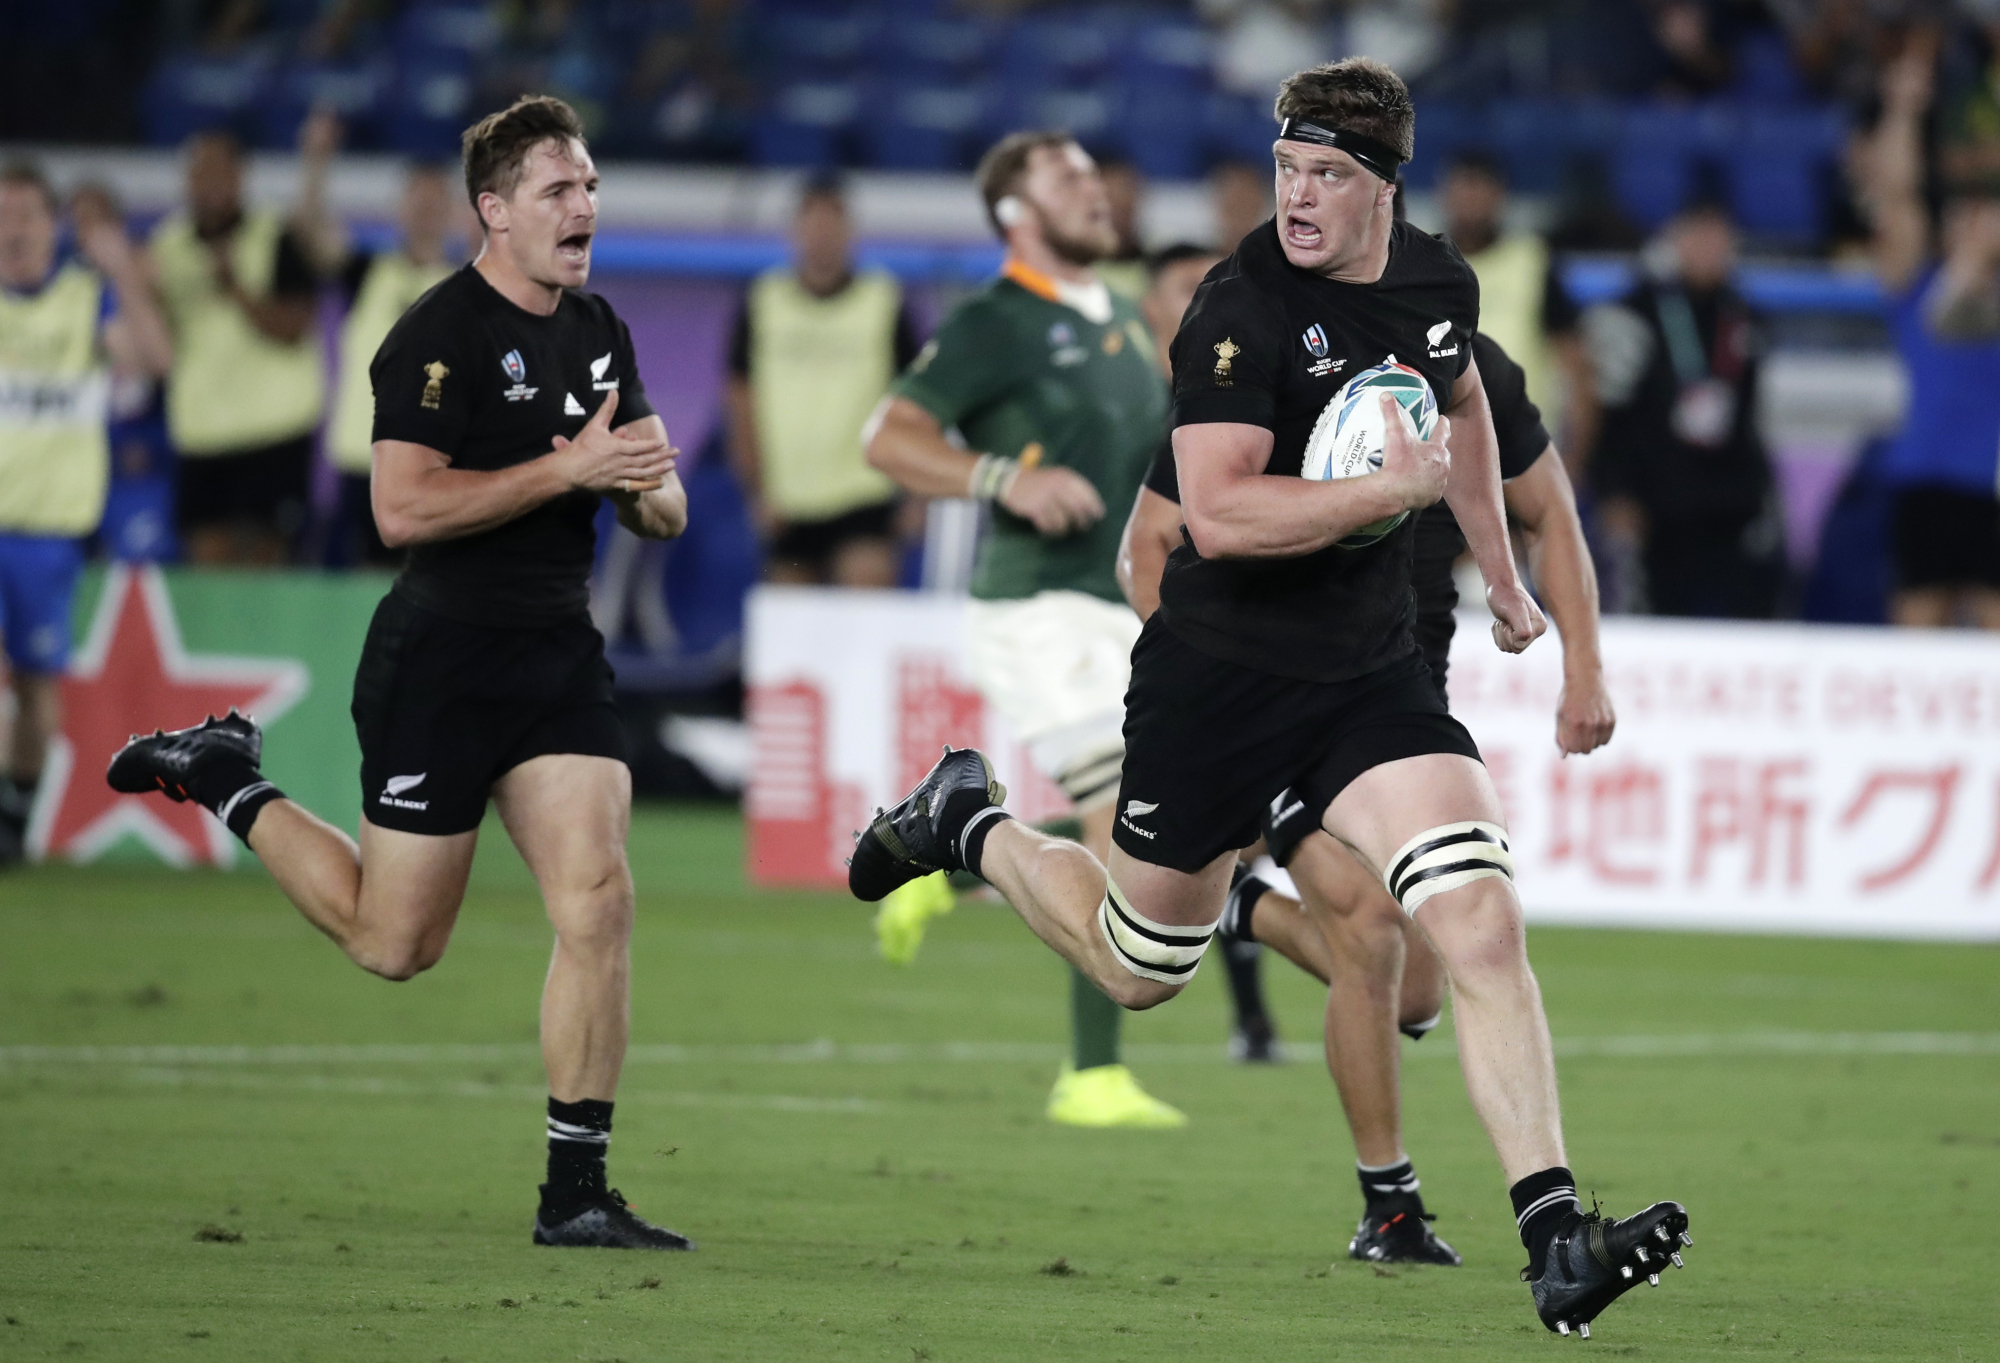 All Blacks deliver clear message with methodical victory over Springboks